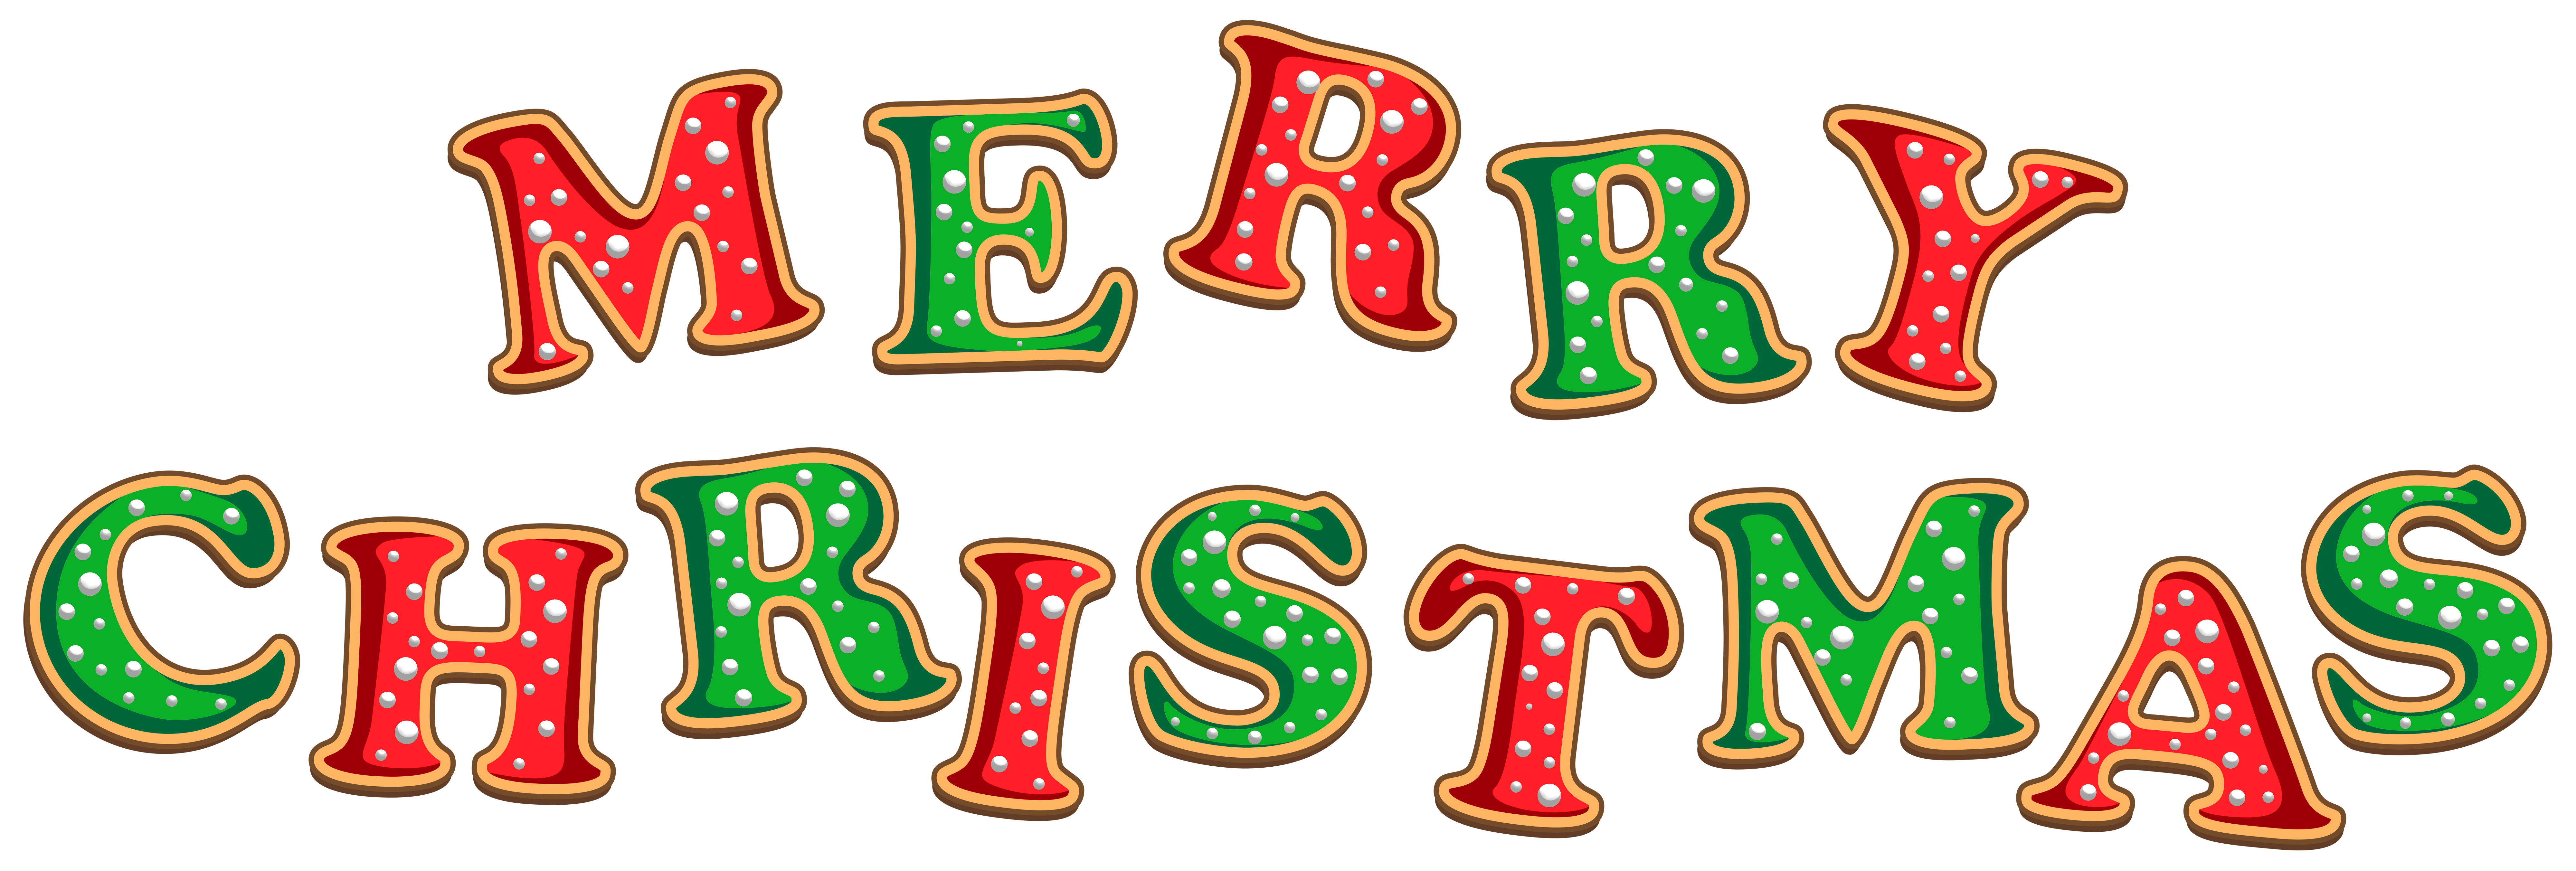 Merry Christmas Text PNG Transparent Clipart​ | Gallery Yopriceville -  High-Quality Free Images and Transparent PNG Clipart